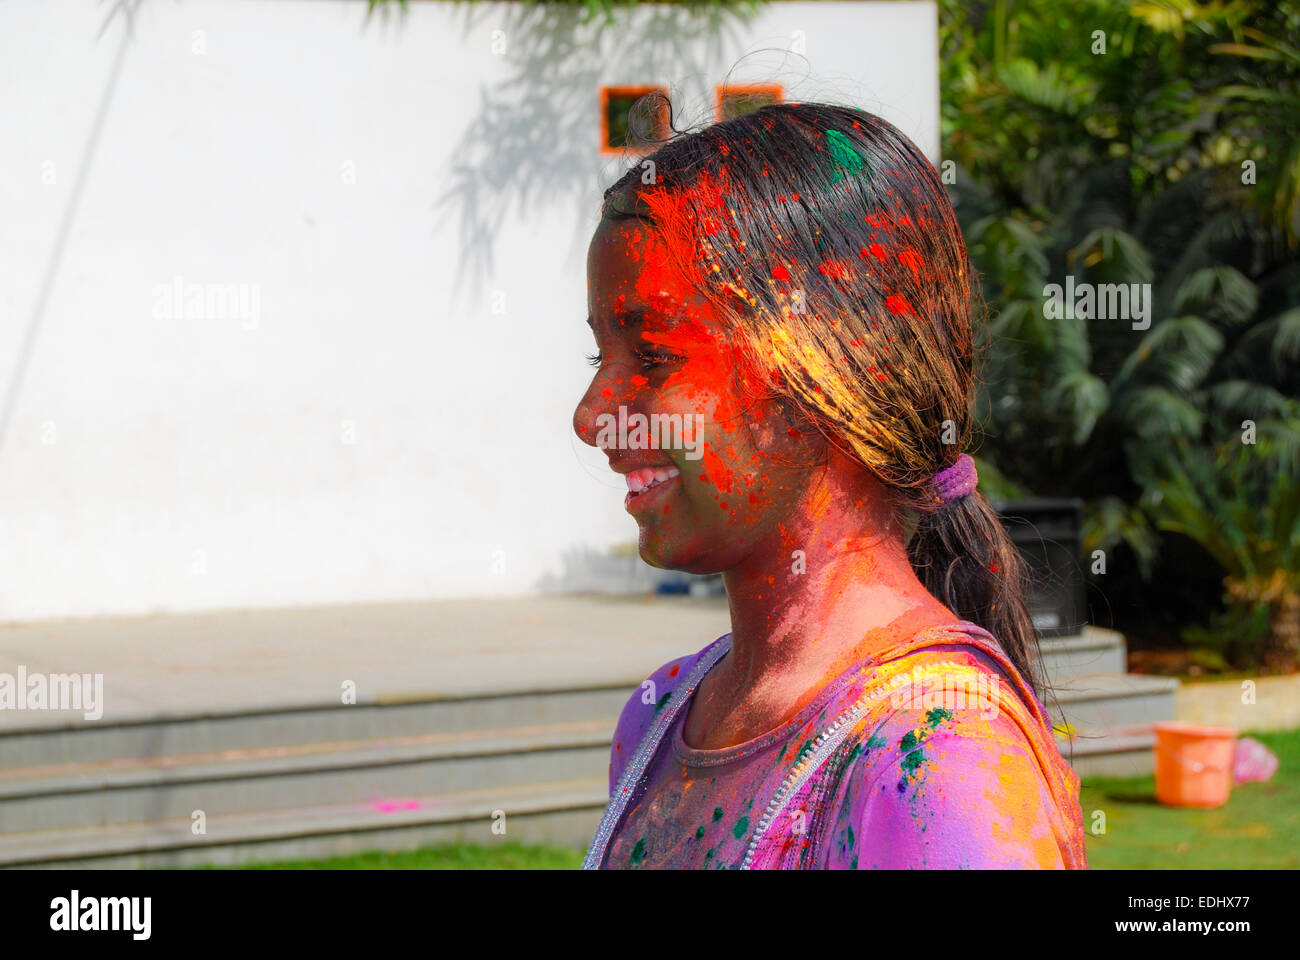 A young Indian girl covered in powder colors during the spring hindu festival Holi also known as a festival of colors. Stock Photo